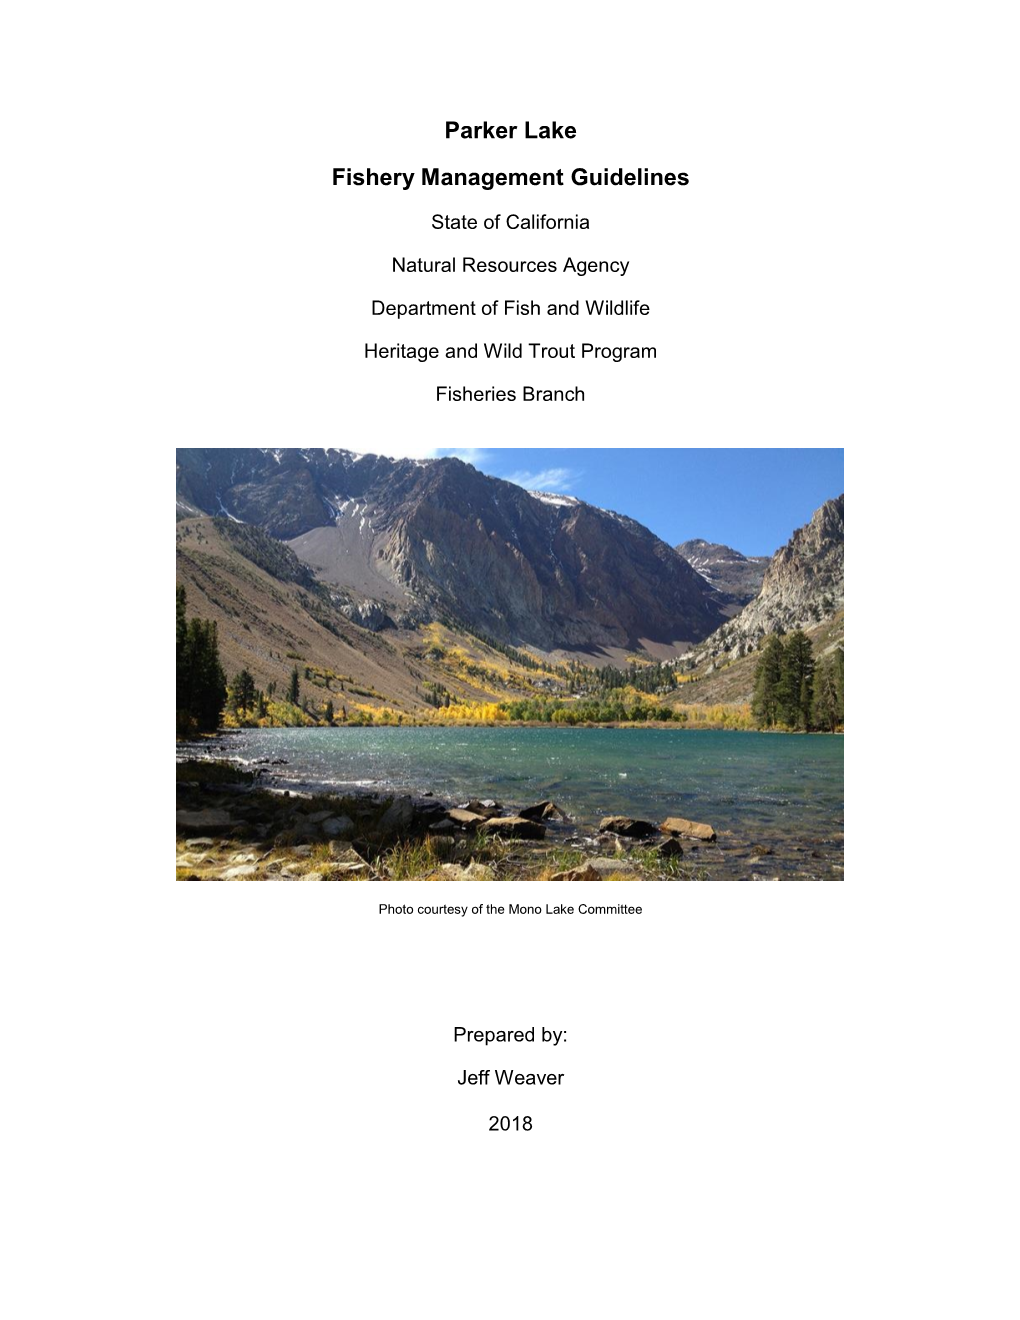 Parker Lake Fishery Management Guidelines